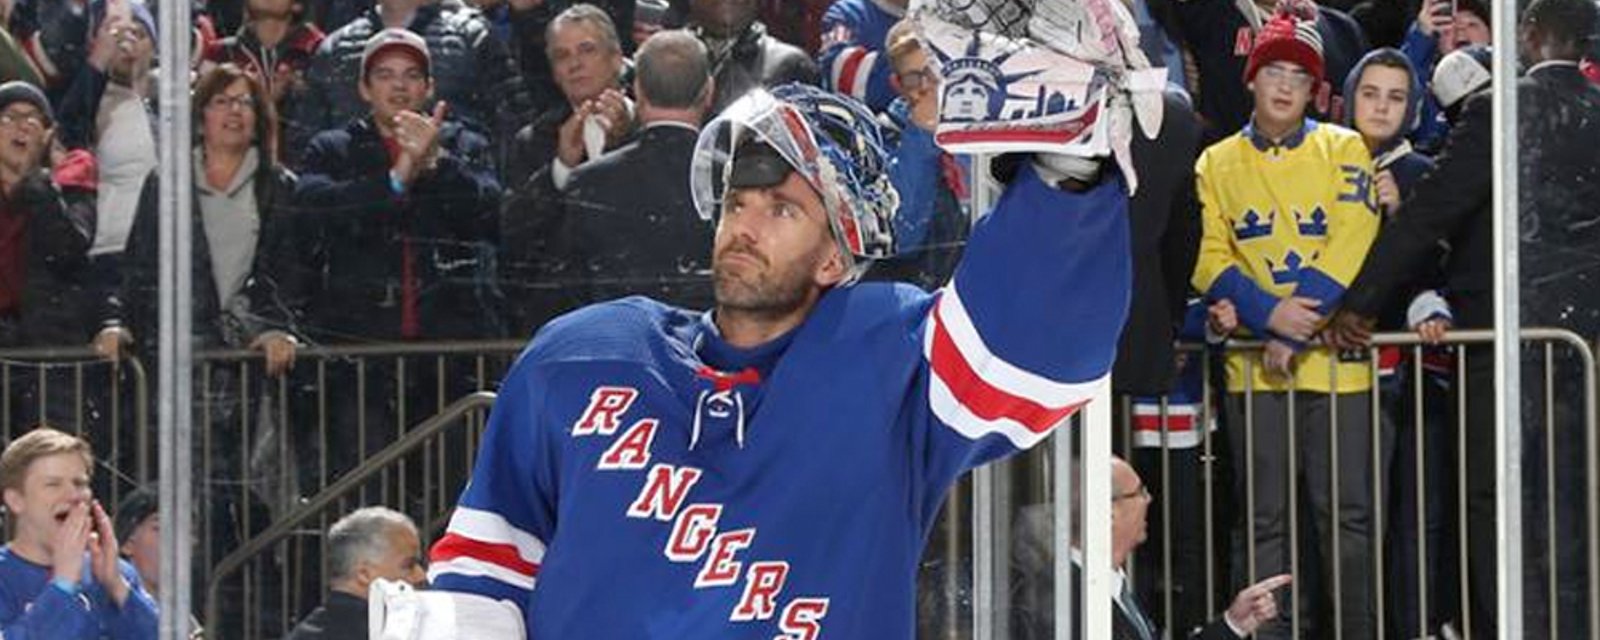 Report: Lundqvist wanted out, buyout with Rangers was considered “mutual”